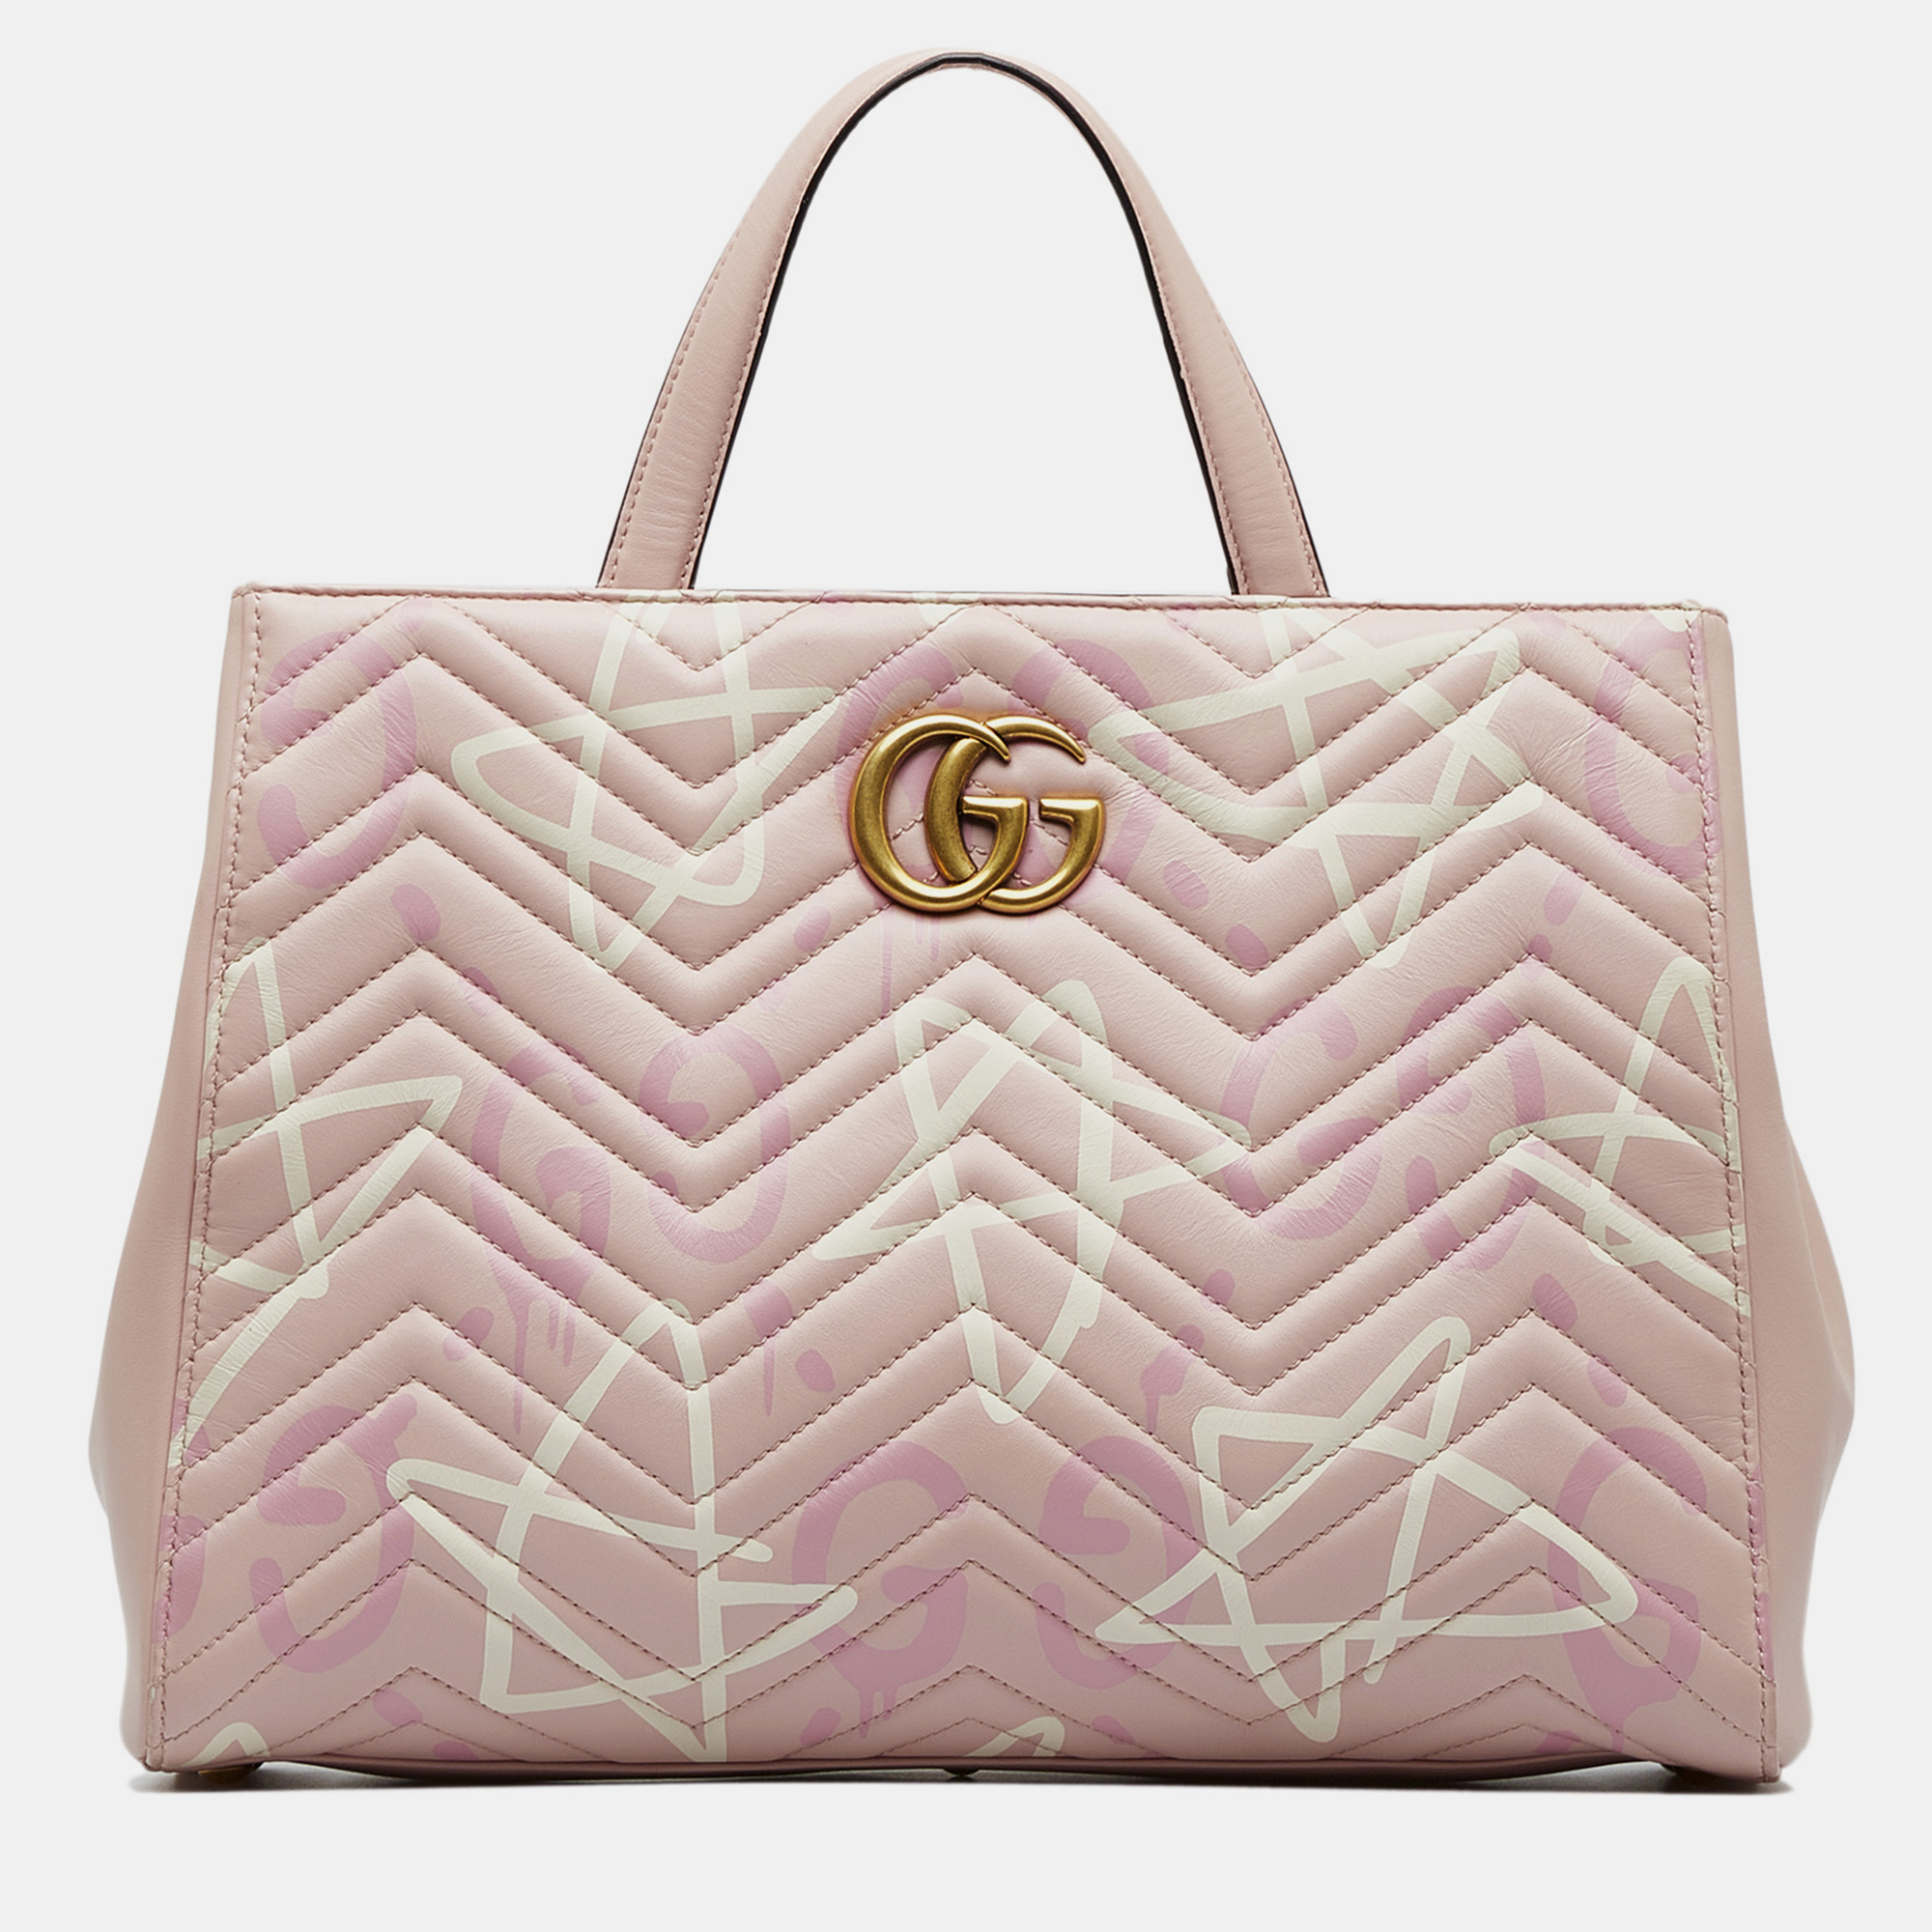 Gucci GG Marmont Ghost Satchel